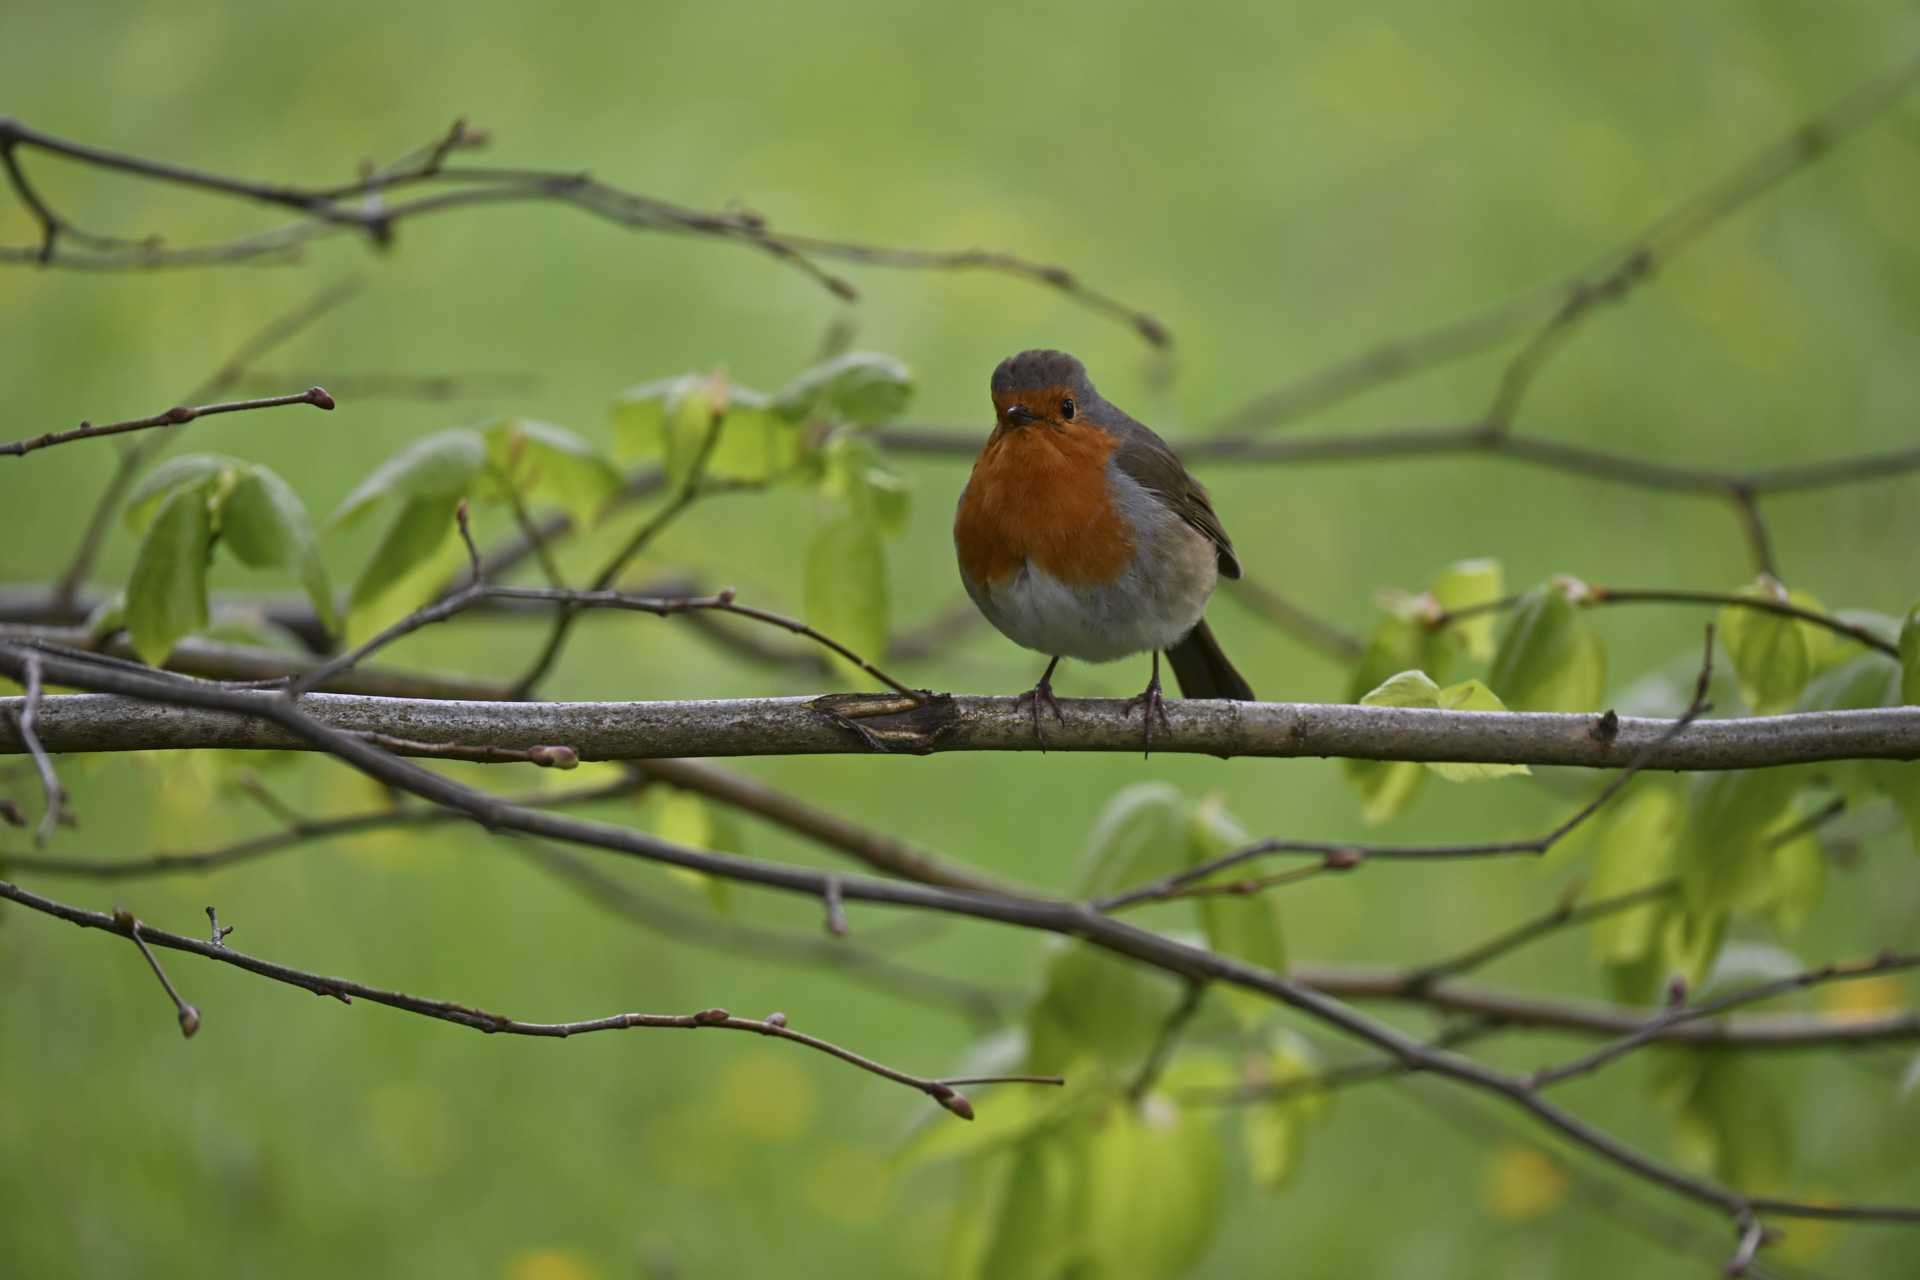 Robin on a branch taken with the Nikon Z 28-400mm f/4-8 VR lens's telephoto setting